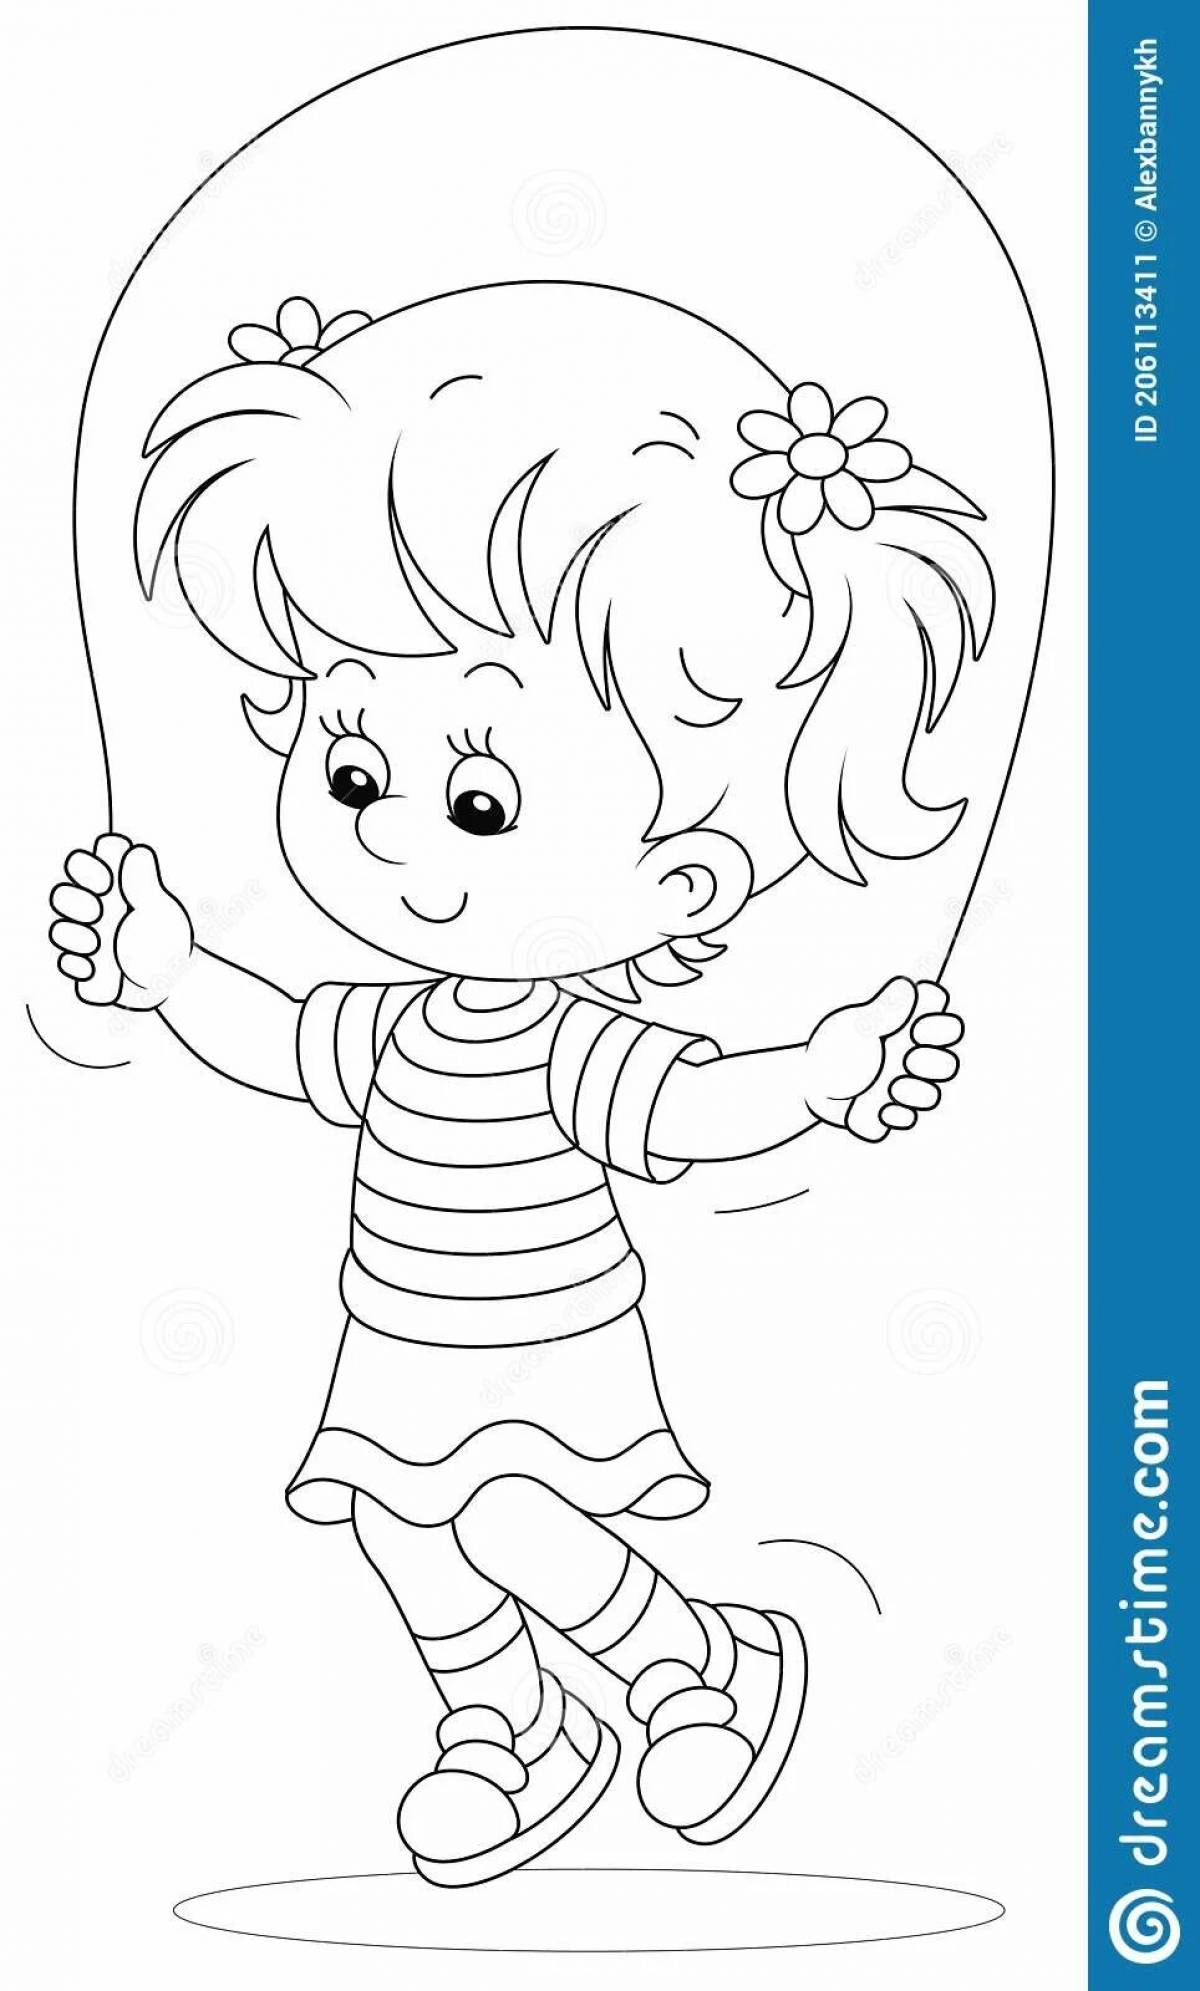 Grand jump coloring page